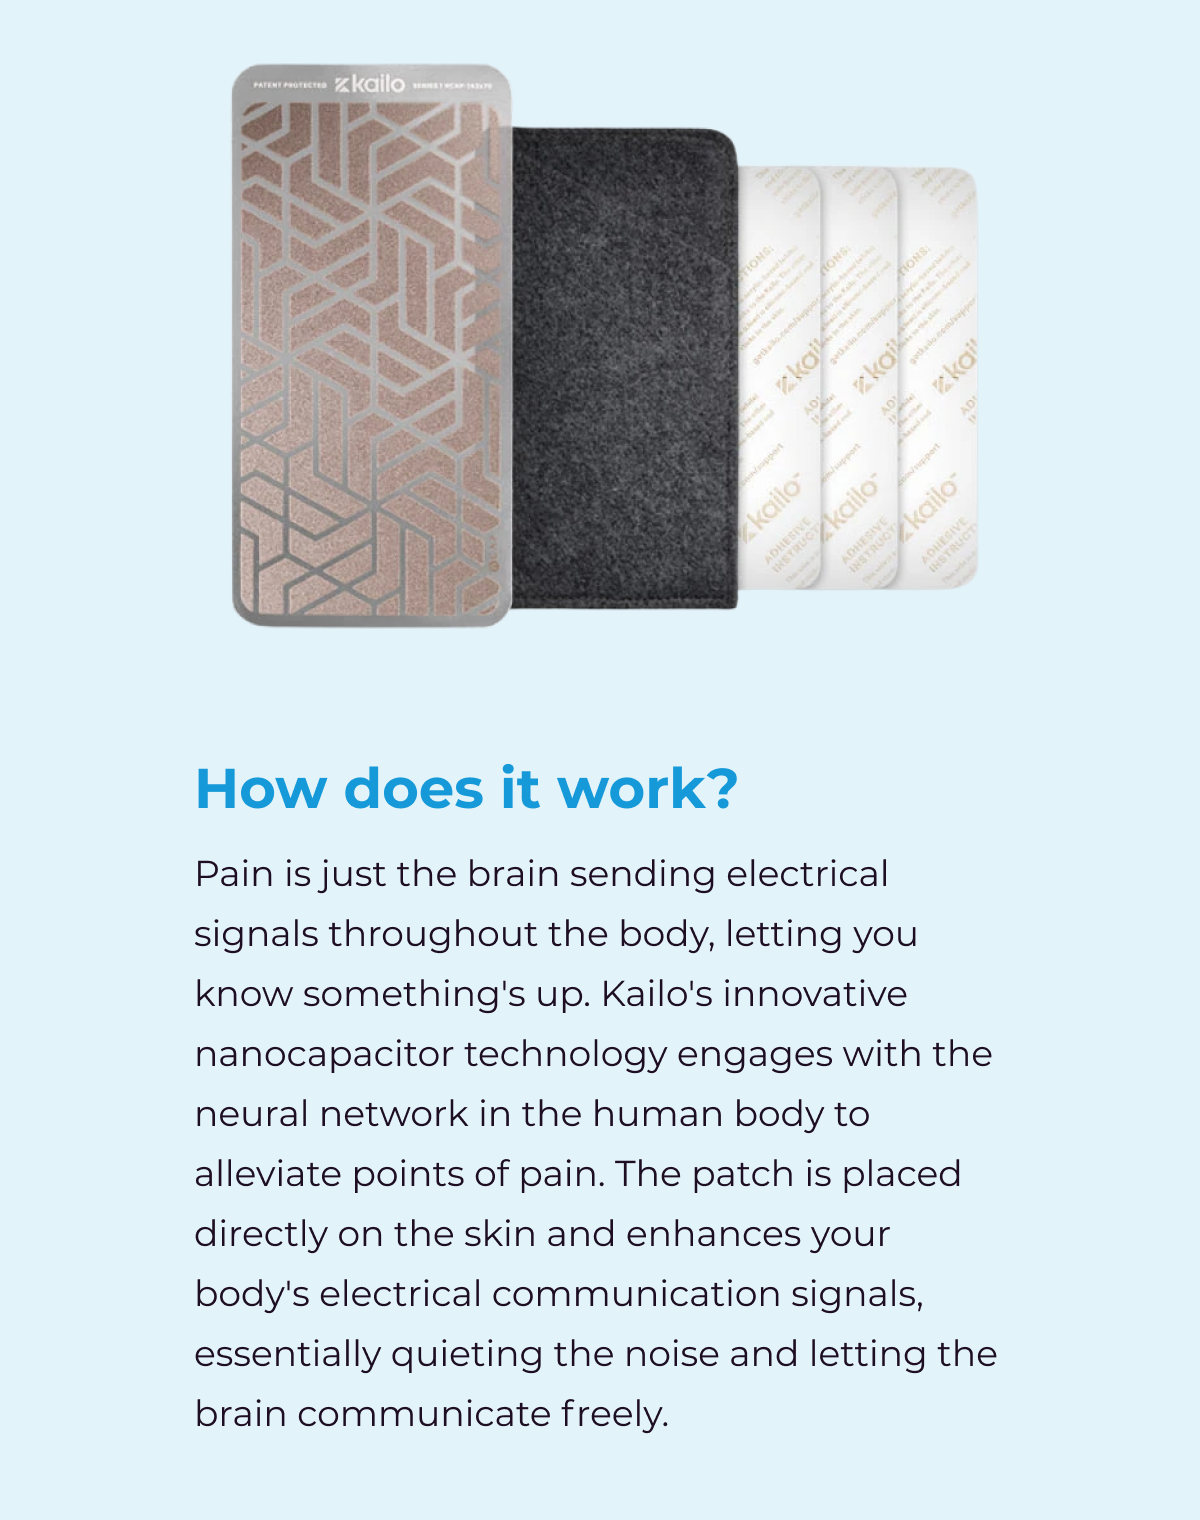 How does it work? Pain is just the brain sending electrical signals throughout the body, letting you know something's up. Kailo's innovative nanocapacitor technology engages with the neural network in the human body to alleviate points of pain. The patch is placed directly on the skin and enhances your body's electrical communication signals, essentially quieting the noise and letting the brain communicate freely.